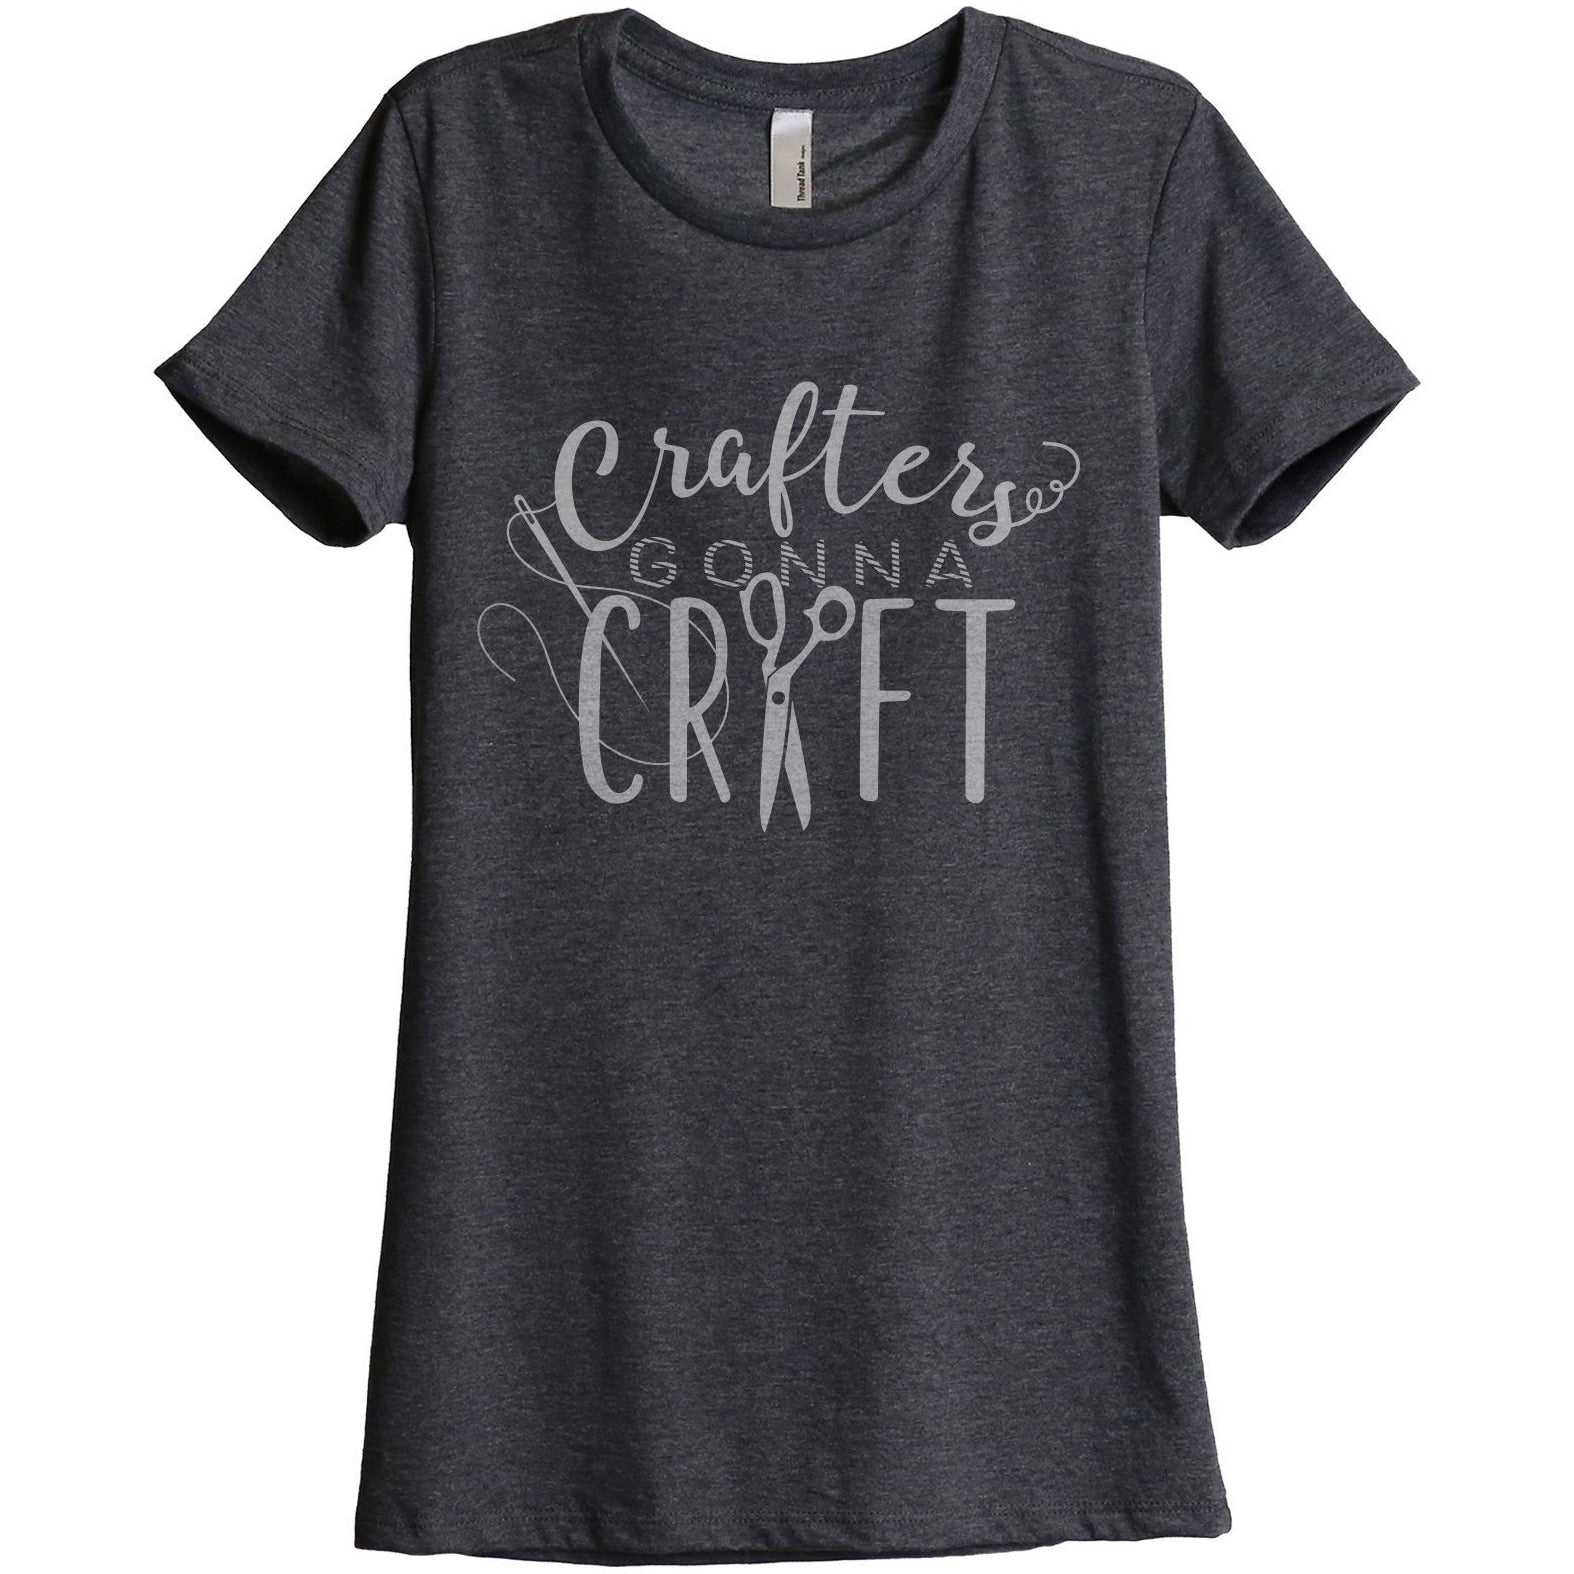 Crafters Gonna Craft Women's Relaxed Crewneck T-Shirt Top Tee Charcoal Grey
